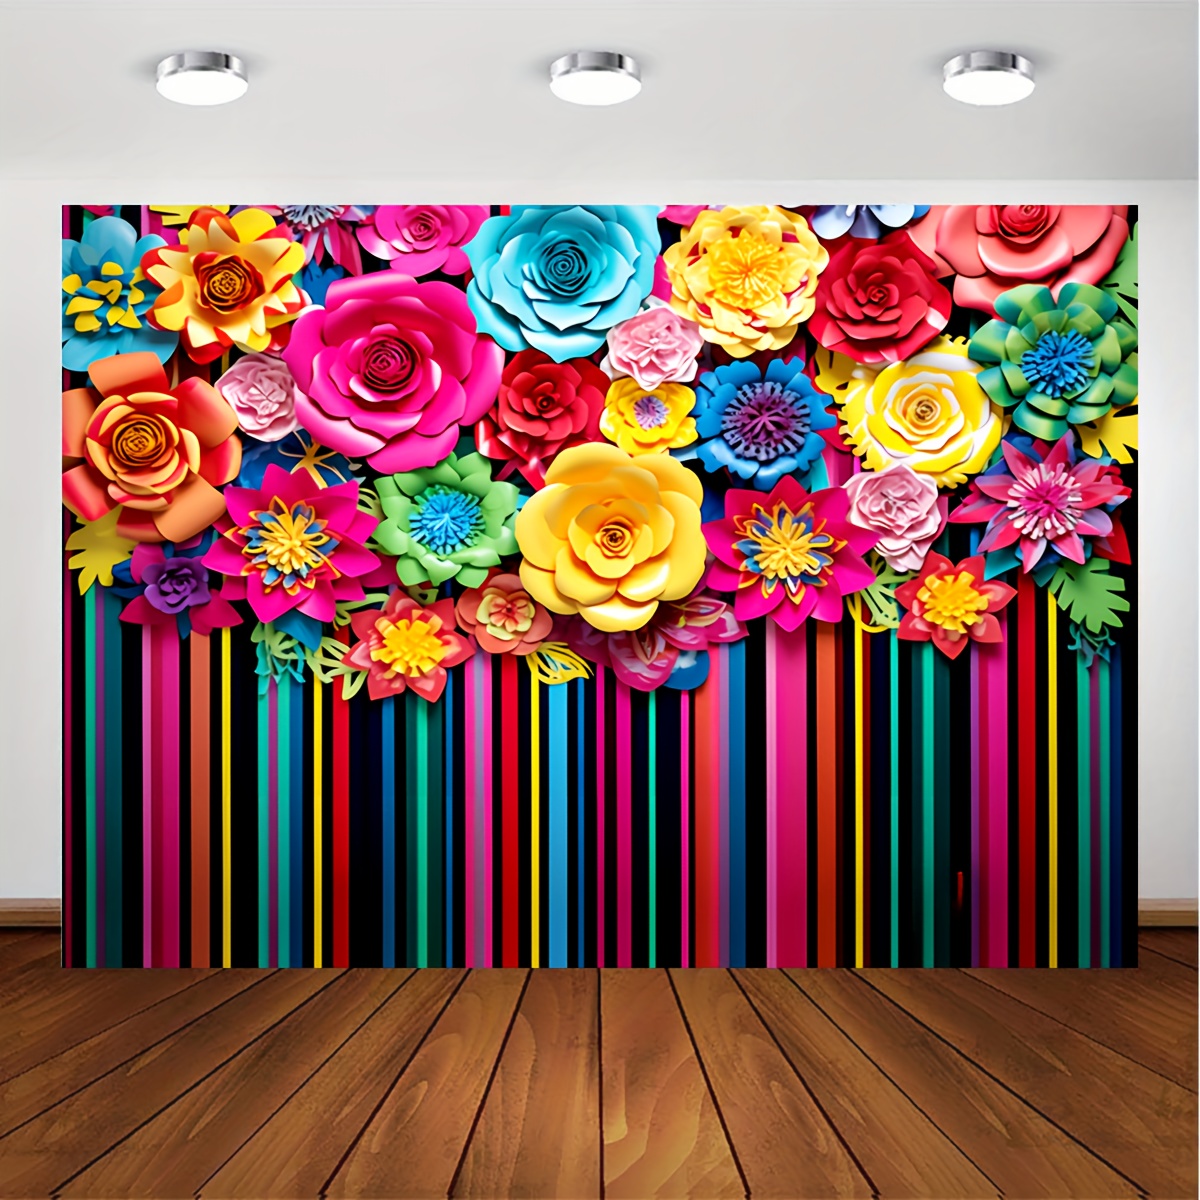 Fiesta Theme Photography Backdrop & Studio Props Kit, Cinco De Mayo Party  Decorations, Mexican Photo Booth Background for Pictures, Summer Pool